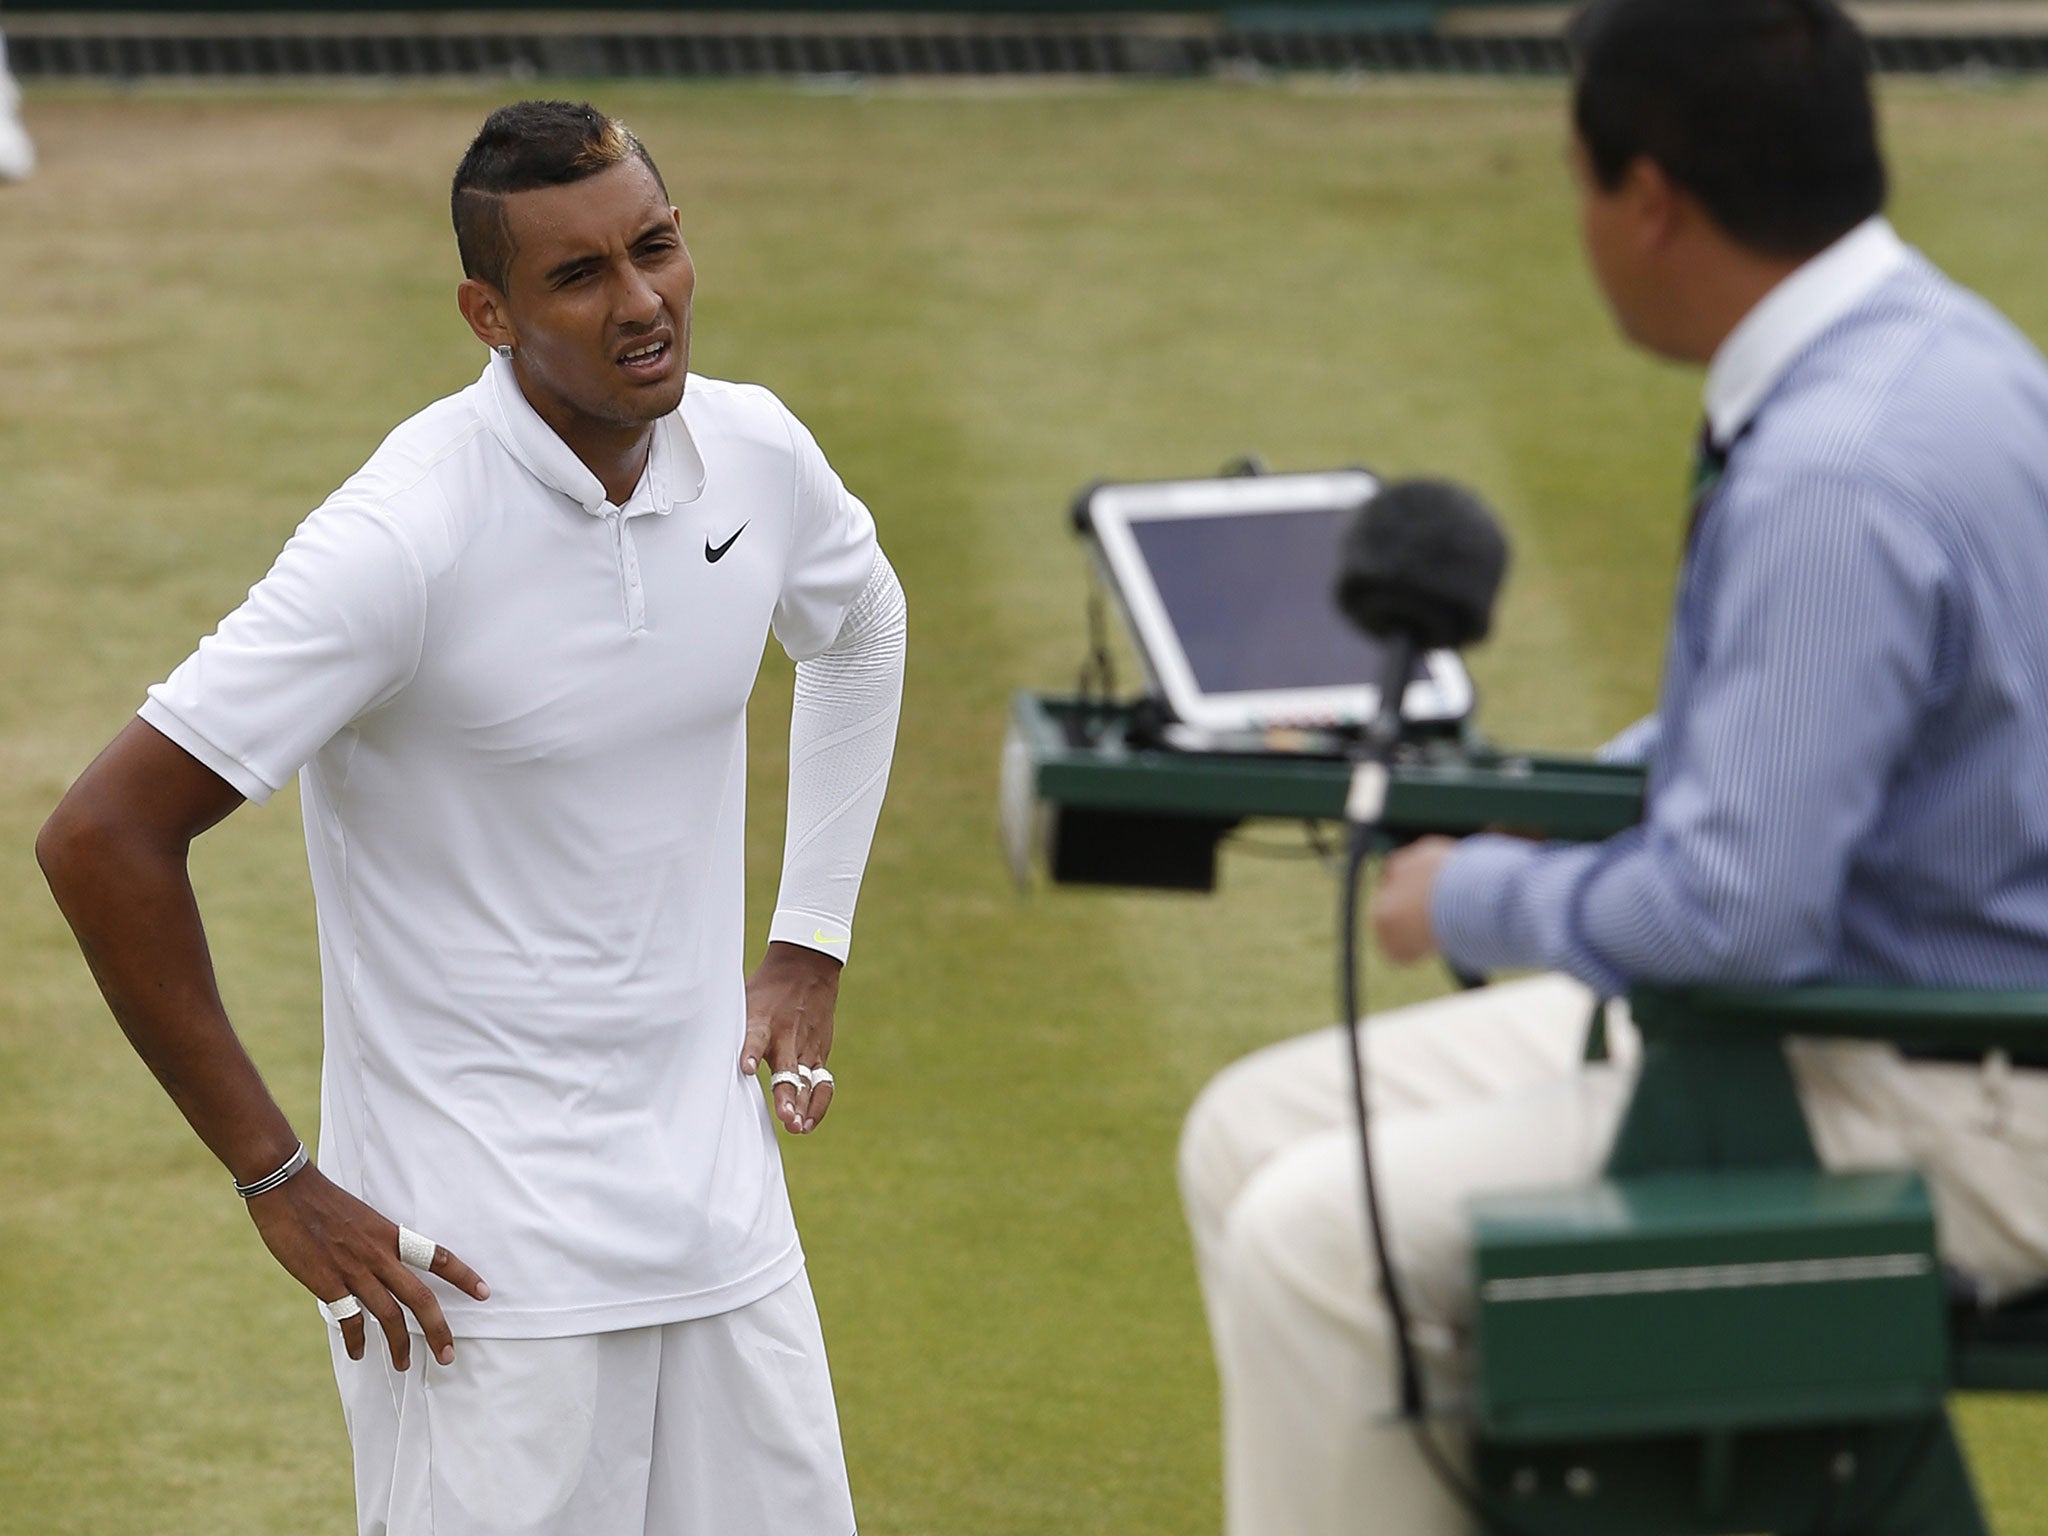 Nick Kyrgios clashes with the umpire